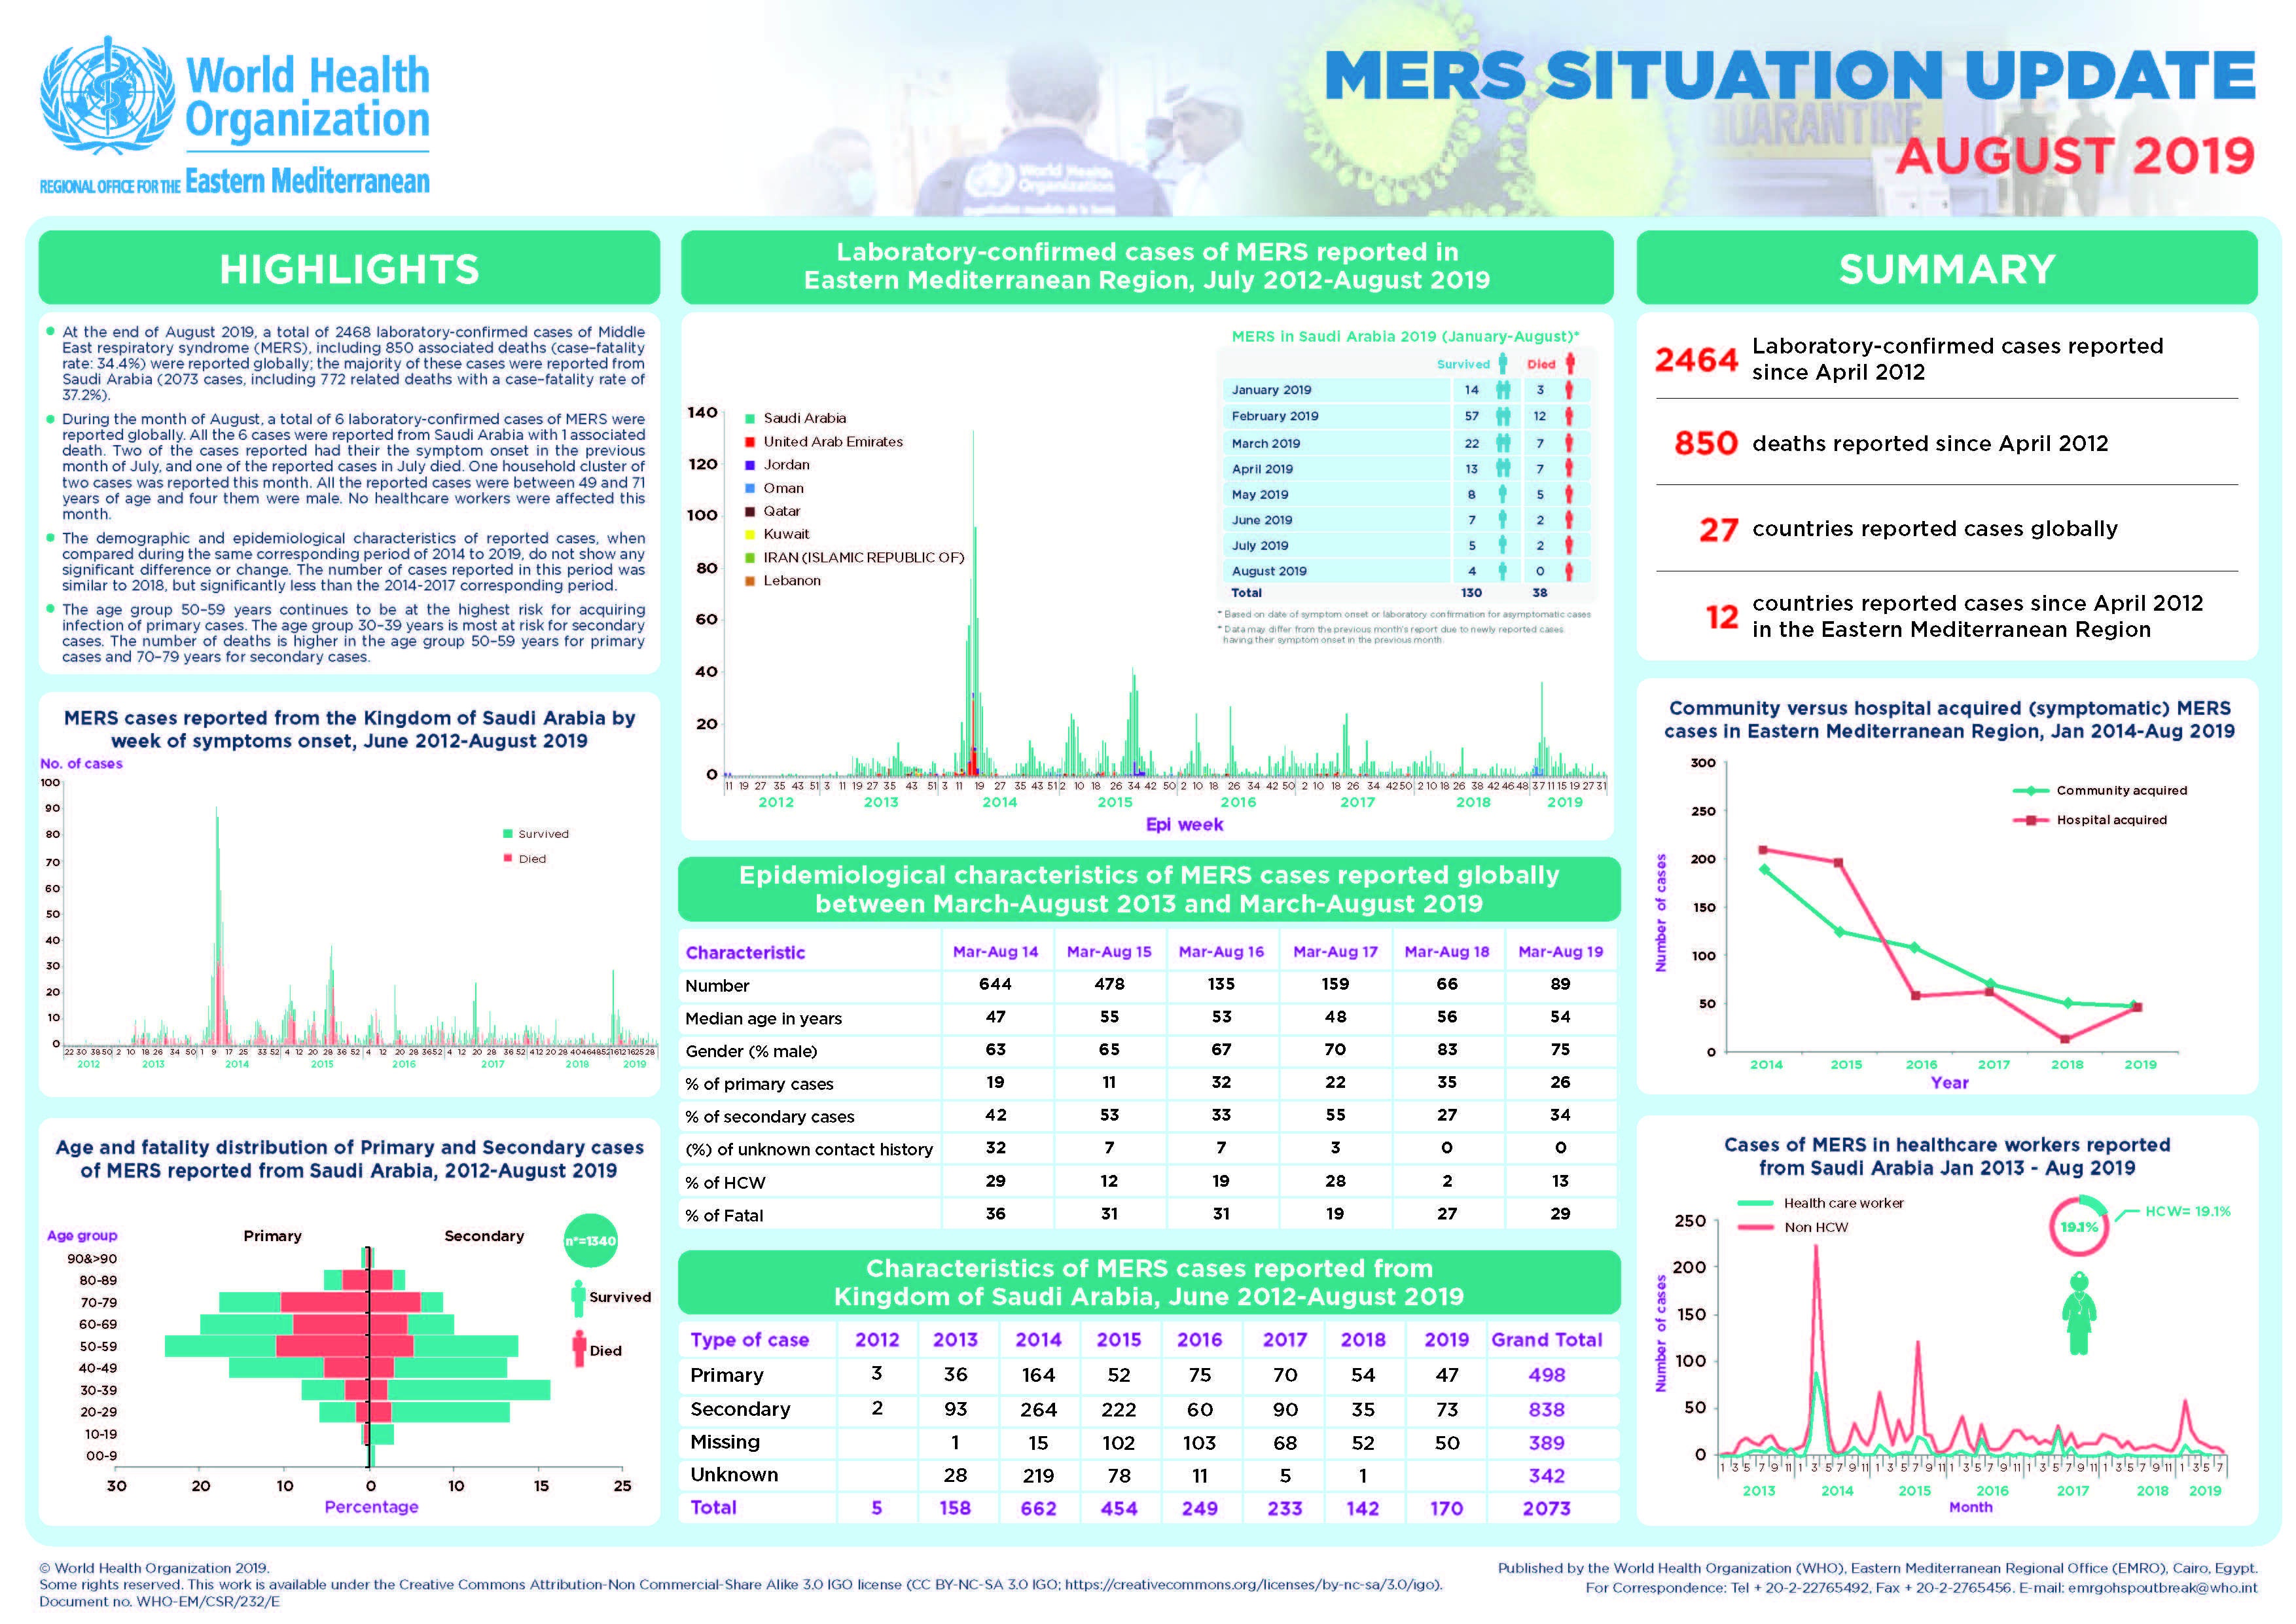 MERS situation update, August 2019